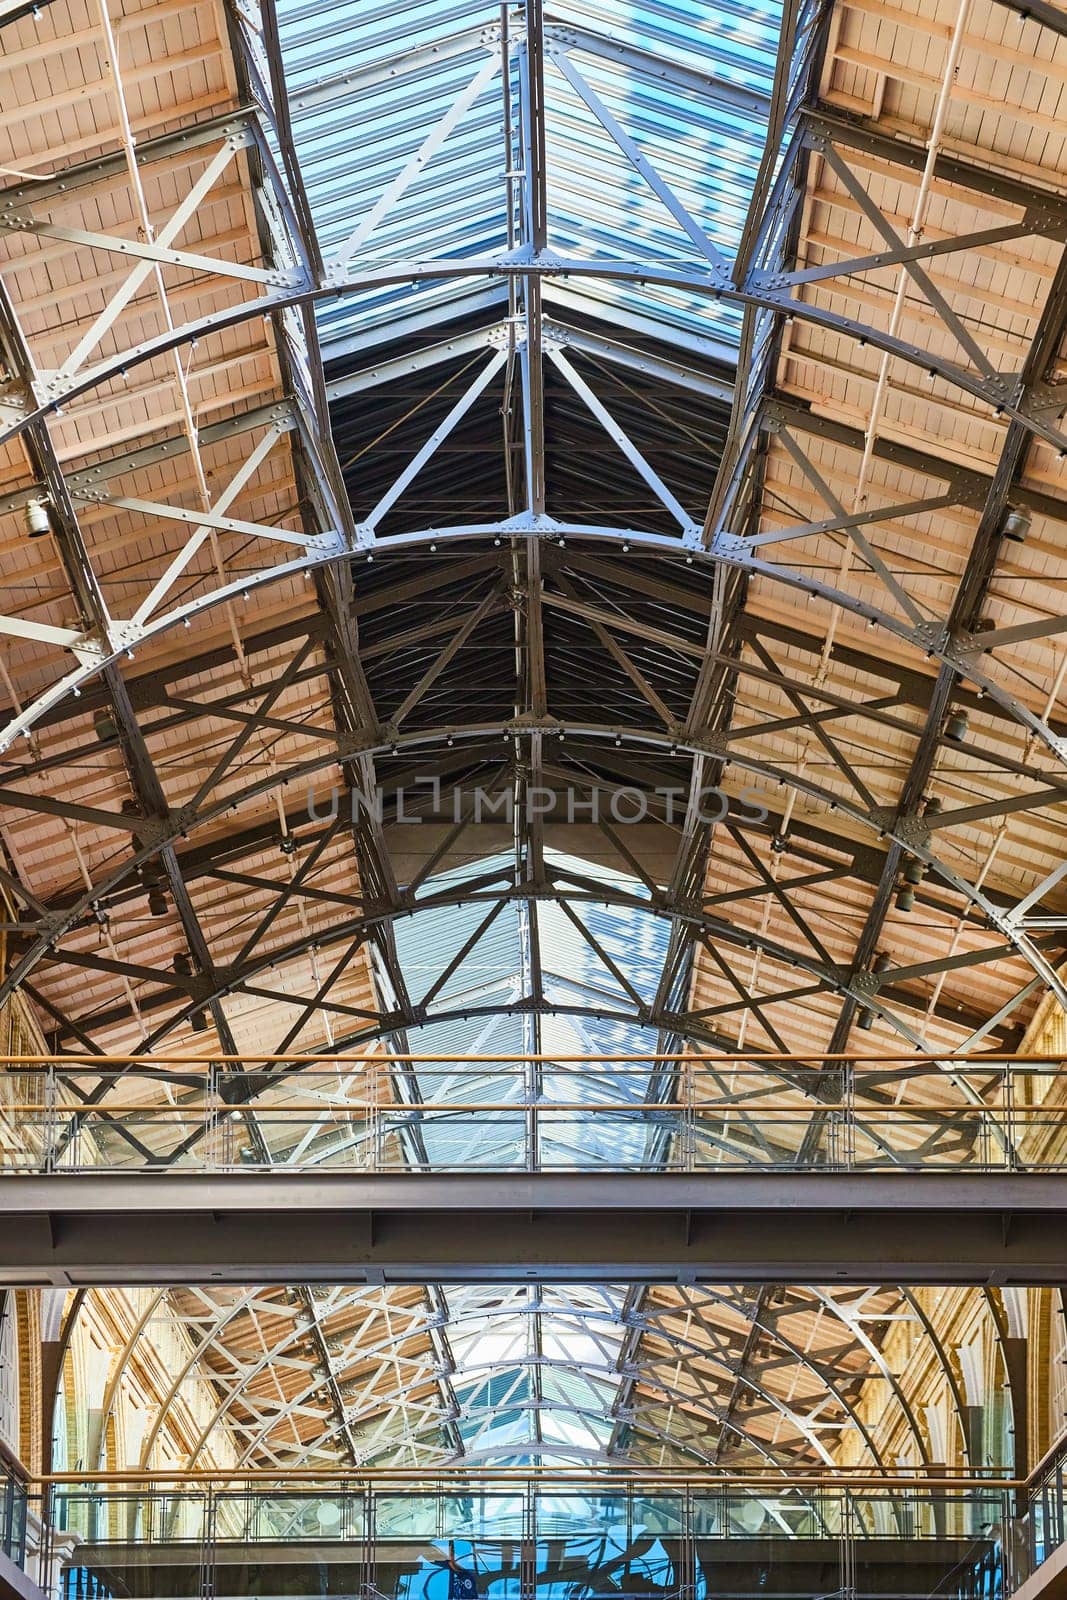 Image of Ceiling with pointed roof interior of The Ferry Building transportation center